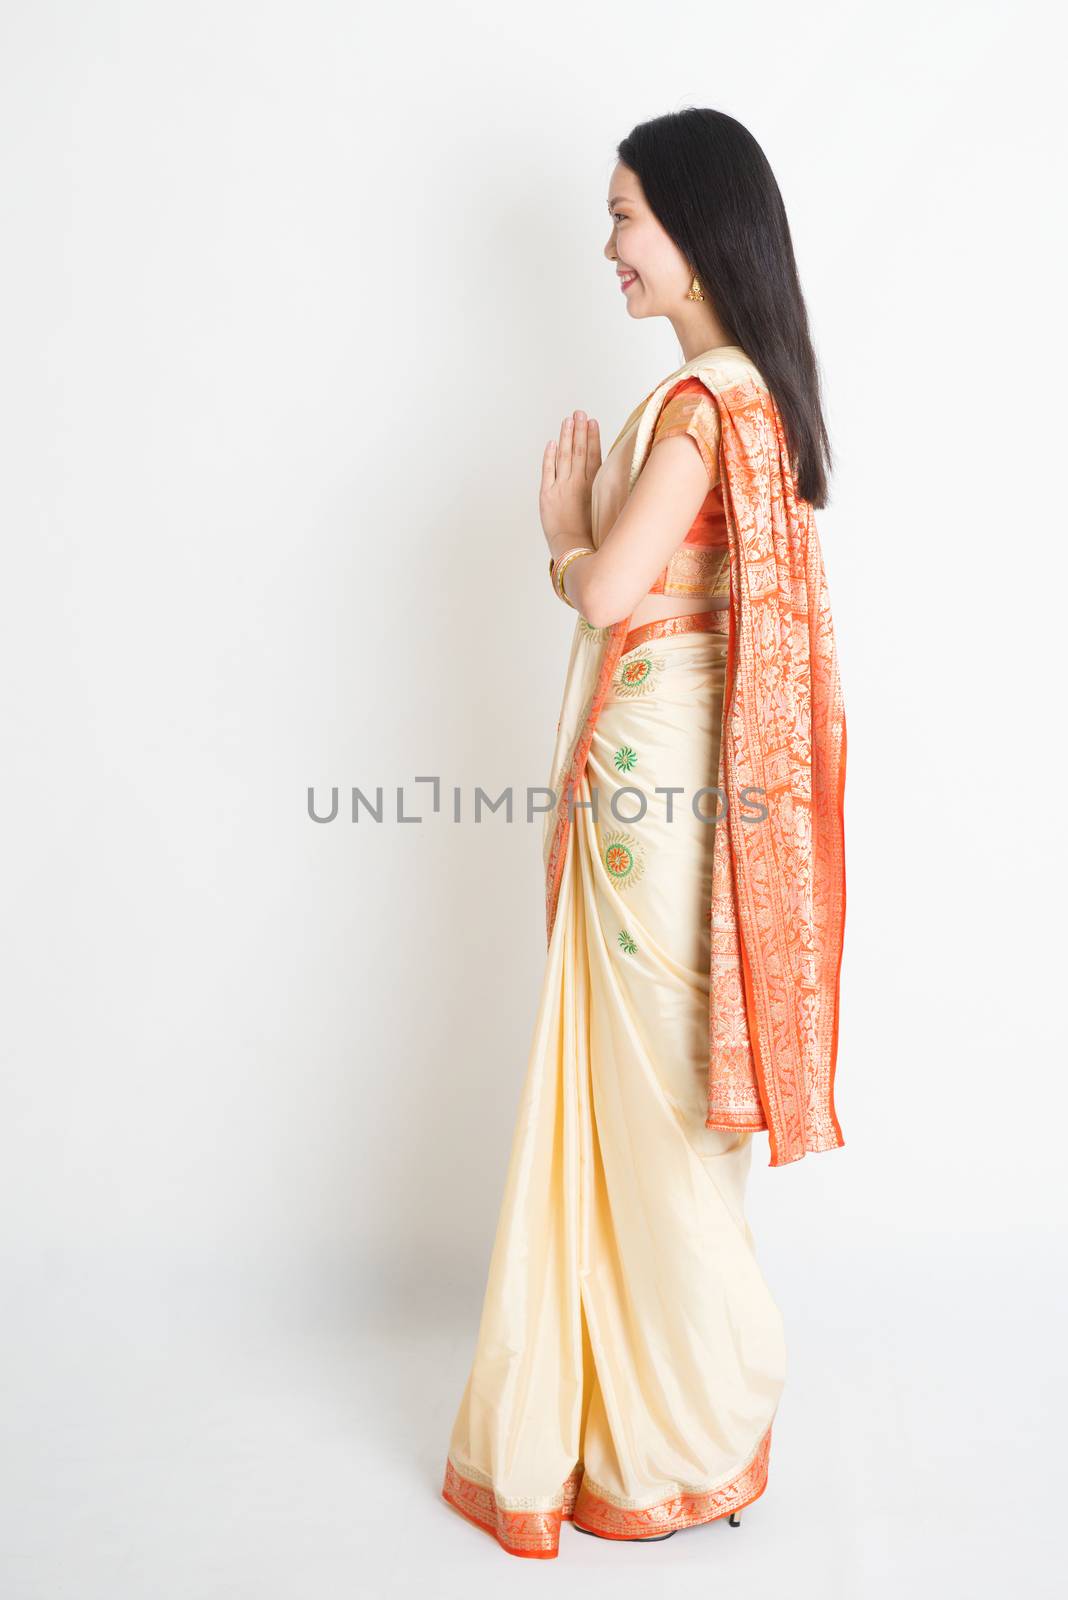 Side view woman in Indian sari dress greeting by szefei